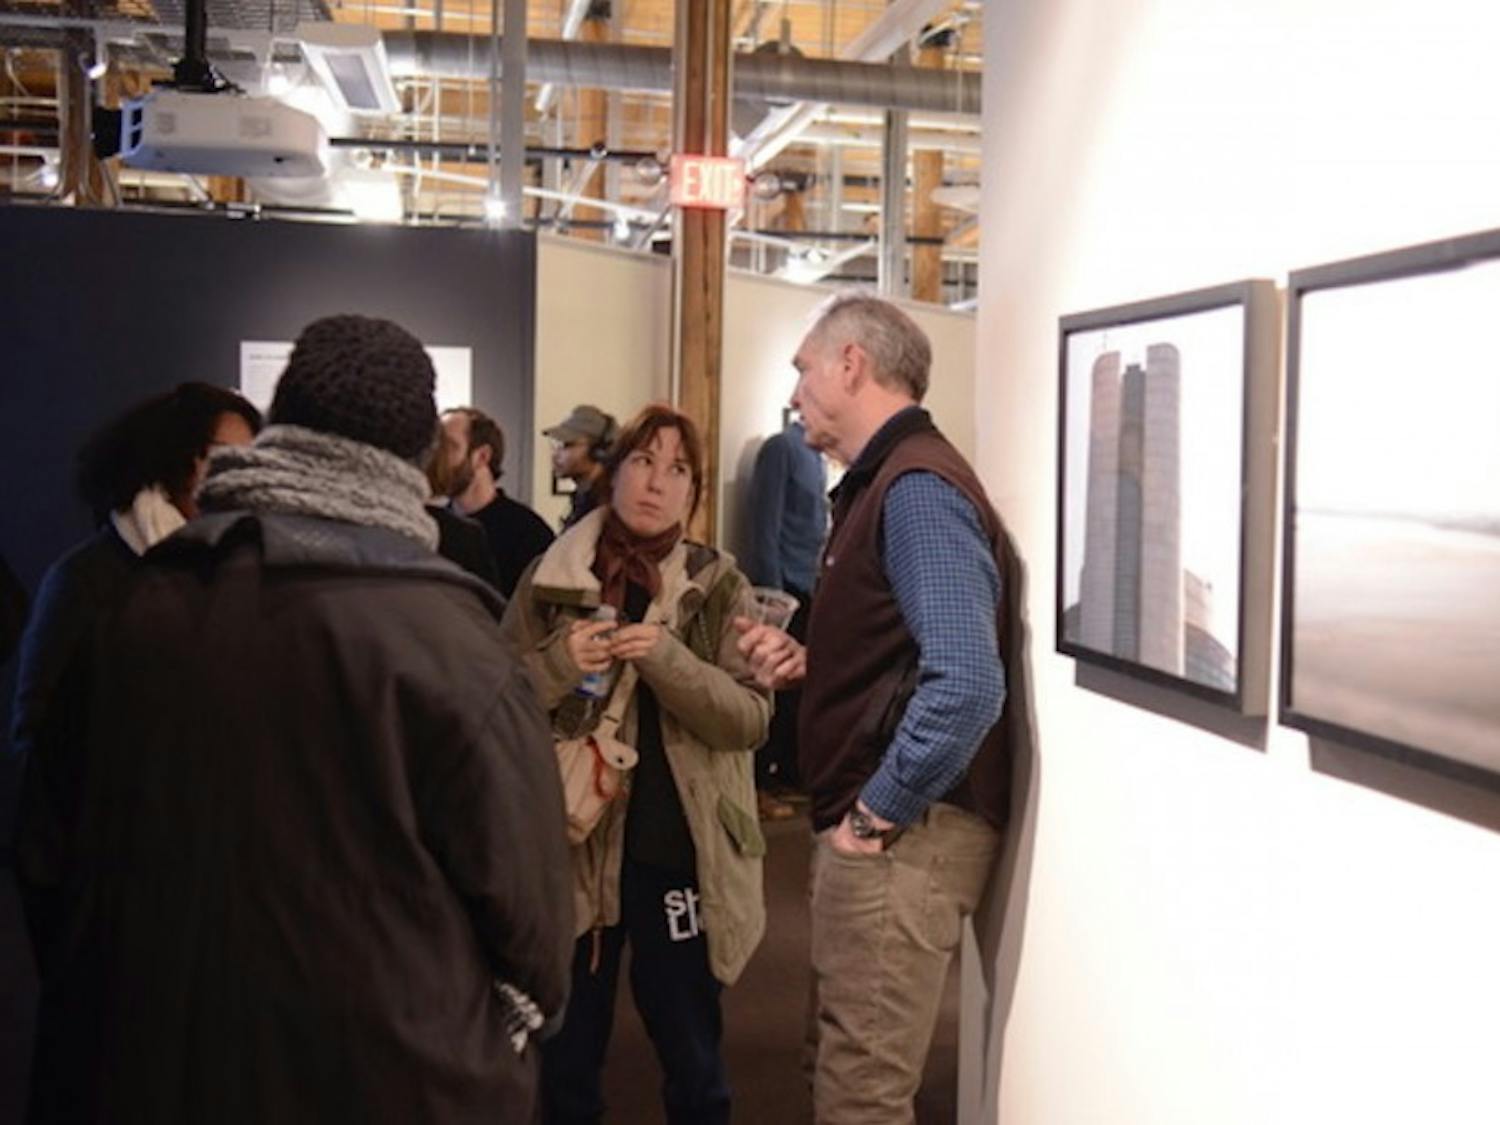 Last Friday's opening reception for "Looking North," now on display in Smith Warehouse Bay 11.